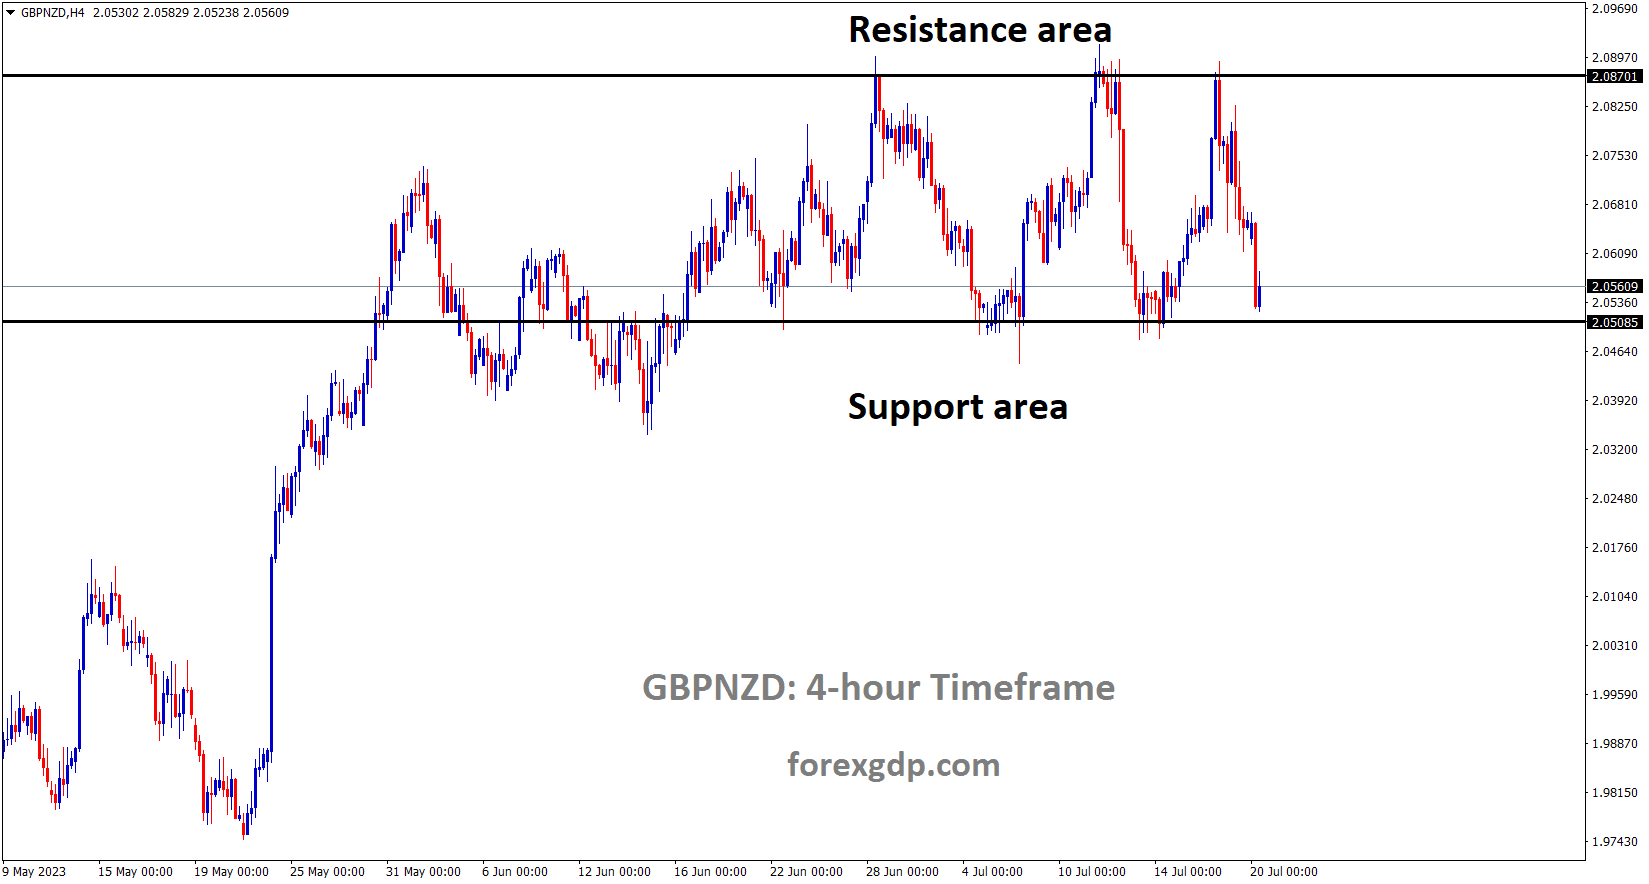 GBPNZD is moving in the Box pattern and the market has reached the horizontal support area of the pattern